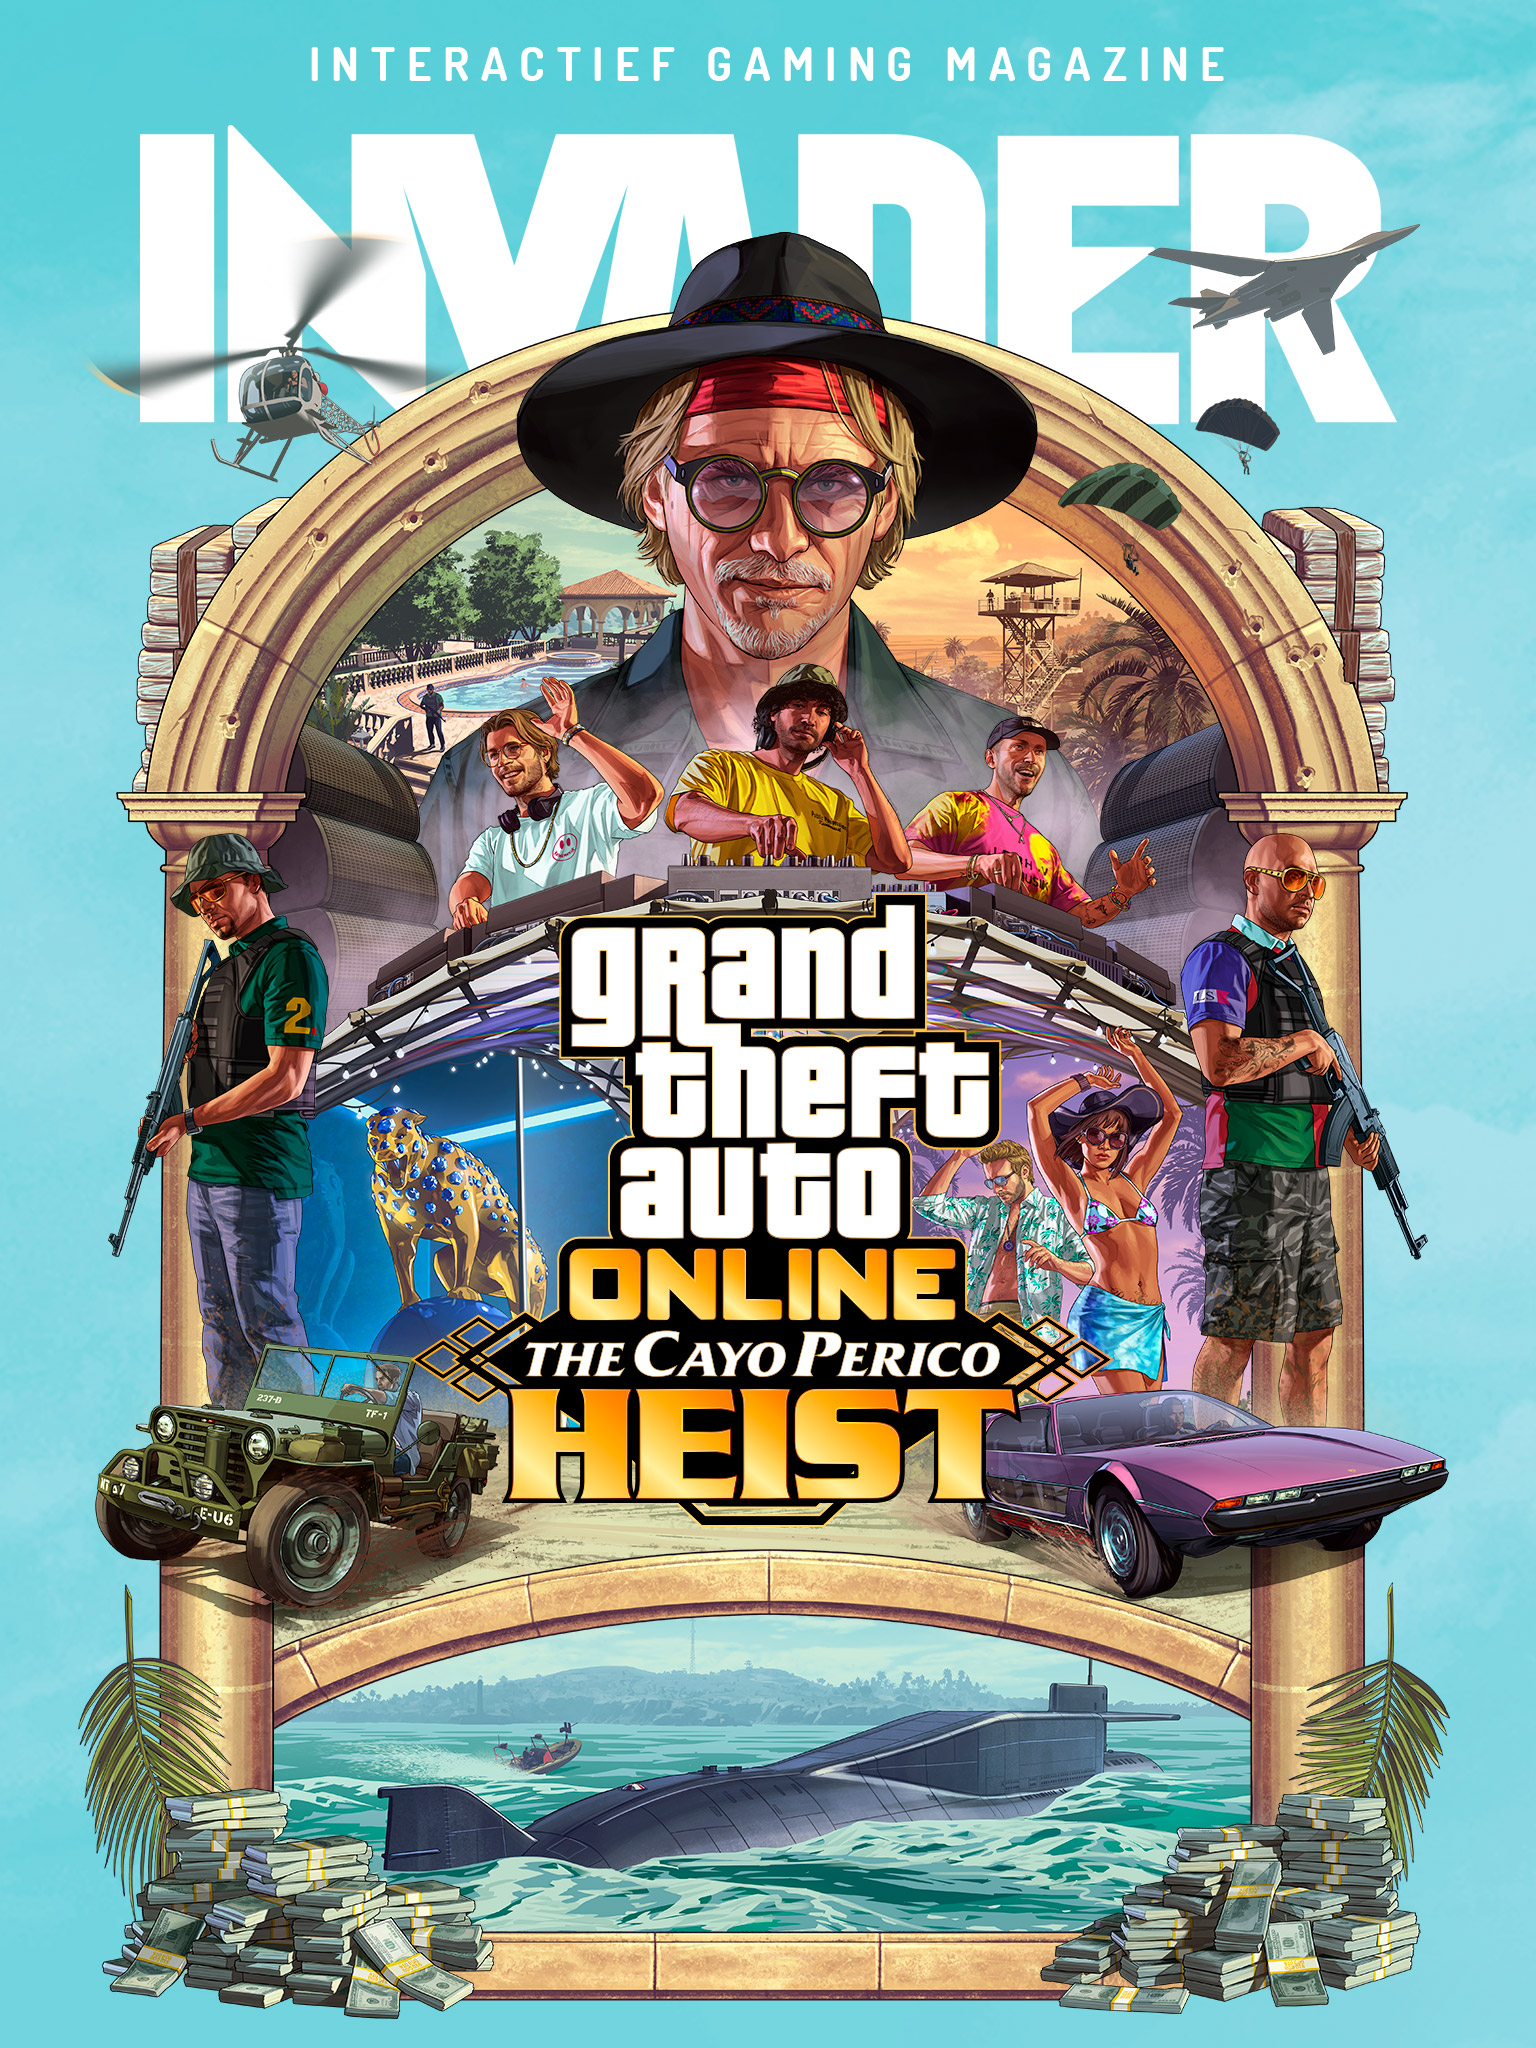 GTAO IslandHeists INVADER COVER 1536x2084 A RGB DELIV